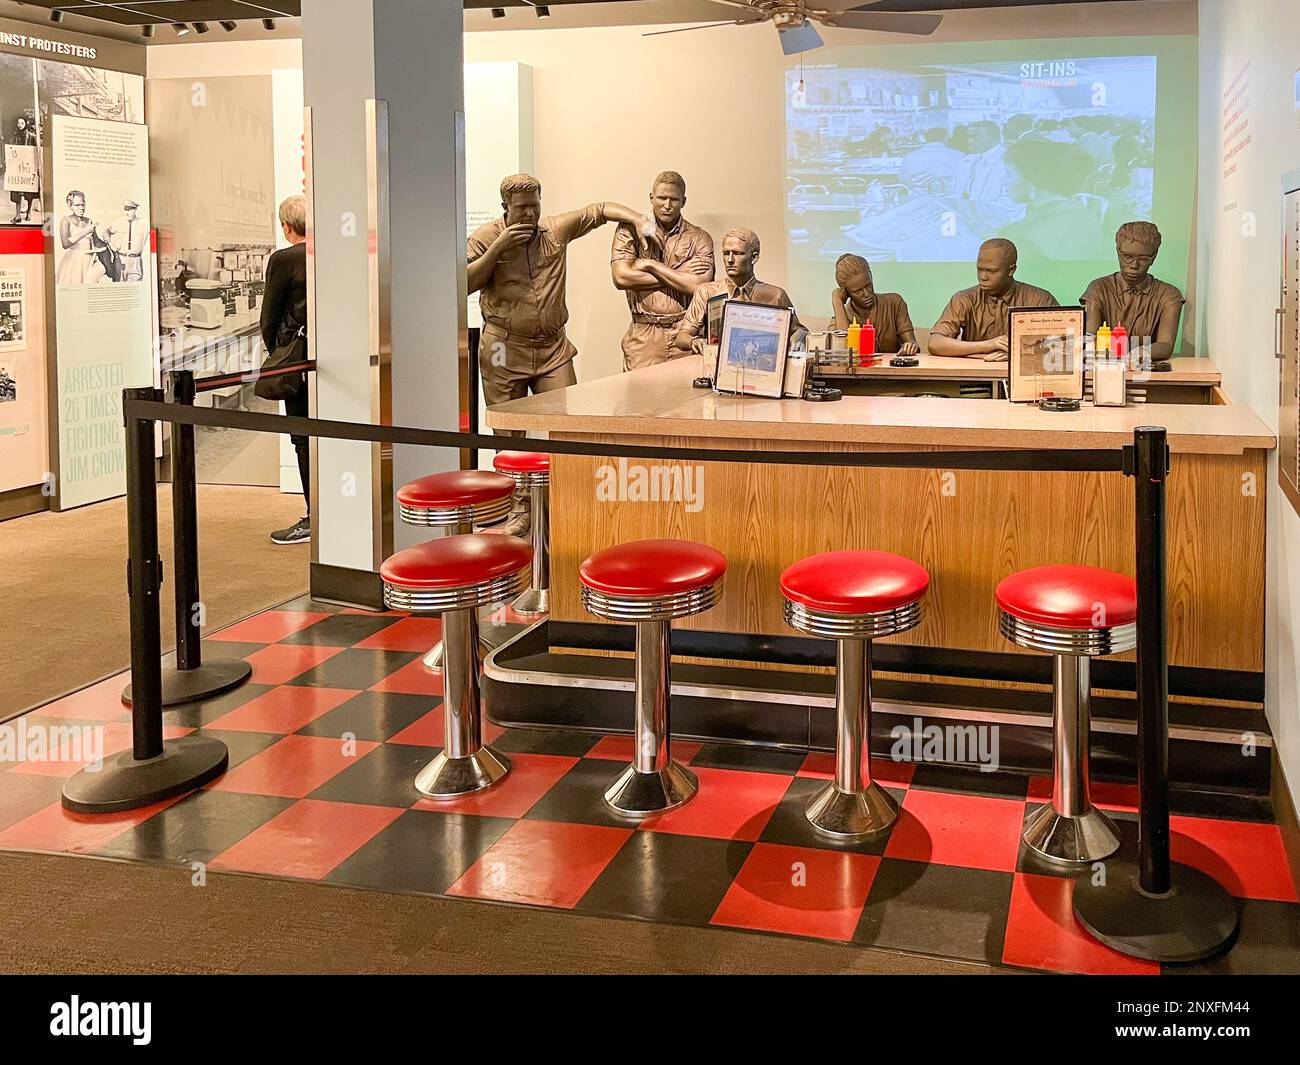 Interior of the National Civil Rights Museum, Lorraine Motel, Memphis, Tennessee, showing student lunch counter sit in demonstration. Stock Photo